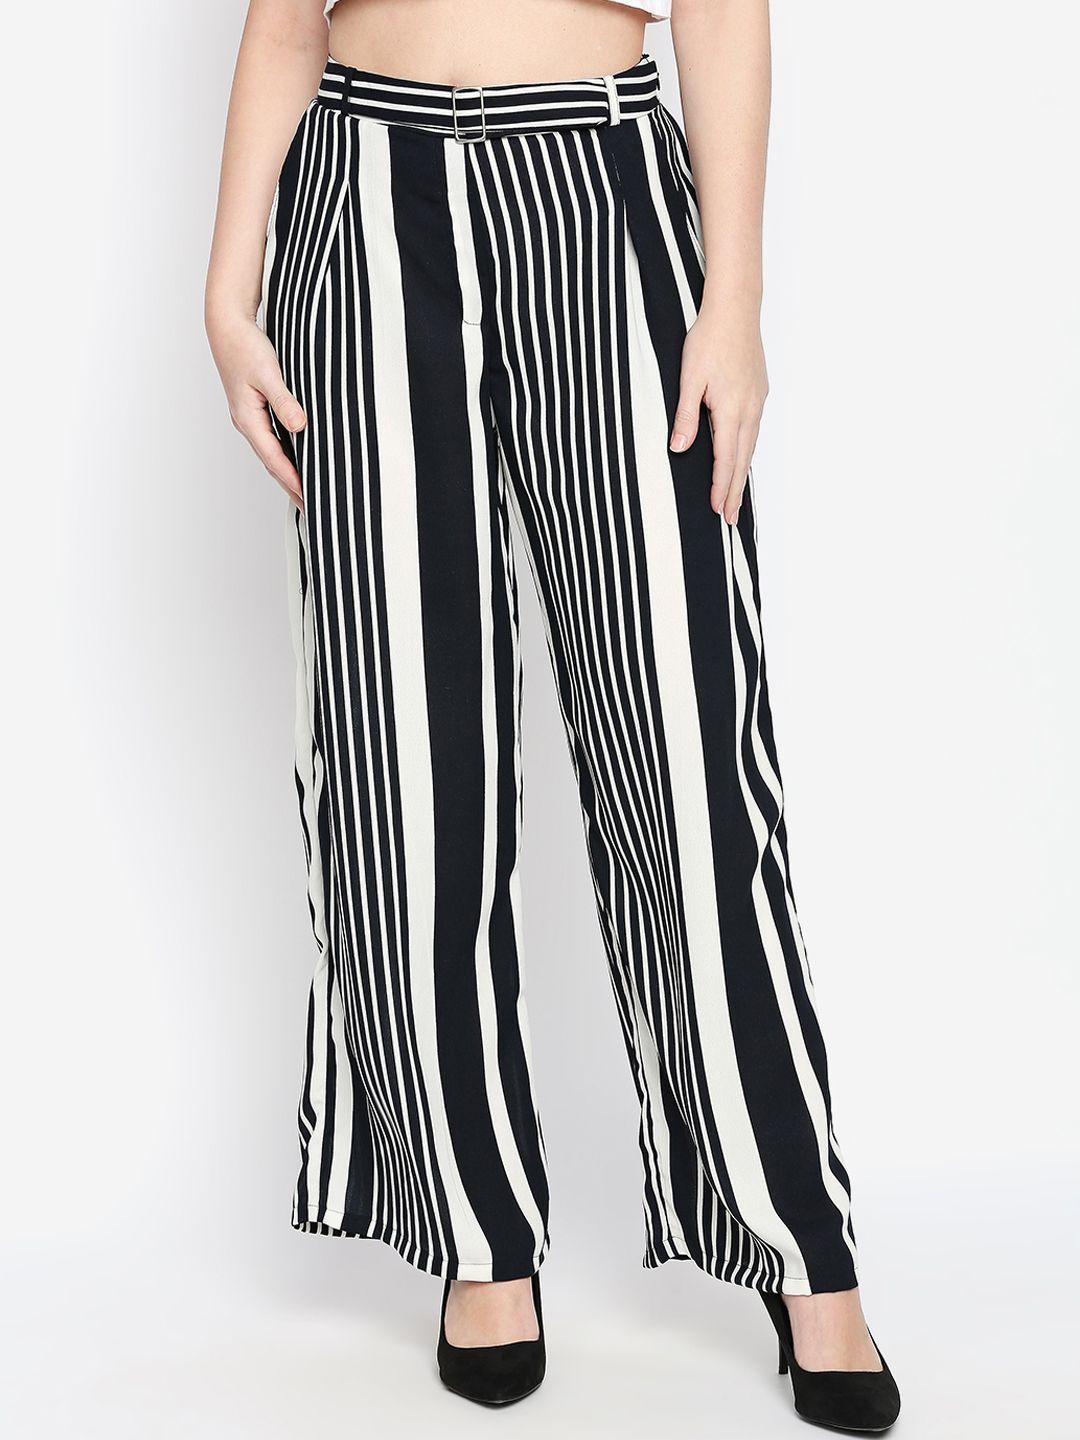 oxolloxo-women-multicoloured-regular-fit-striped-parallel-trousers